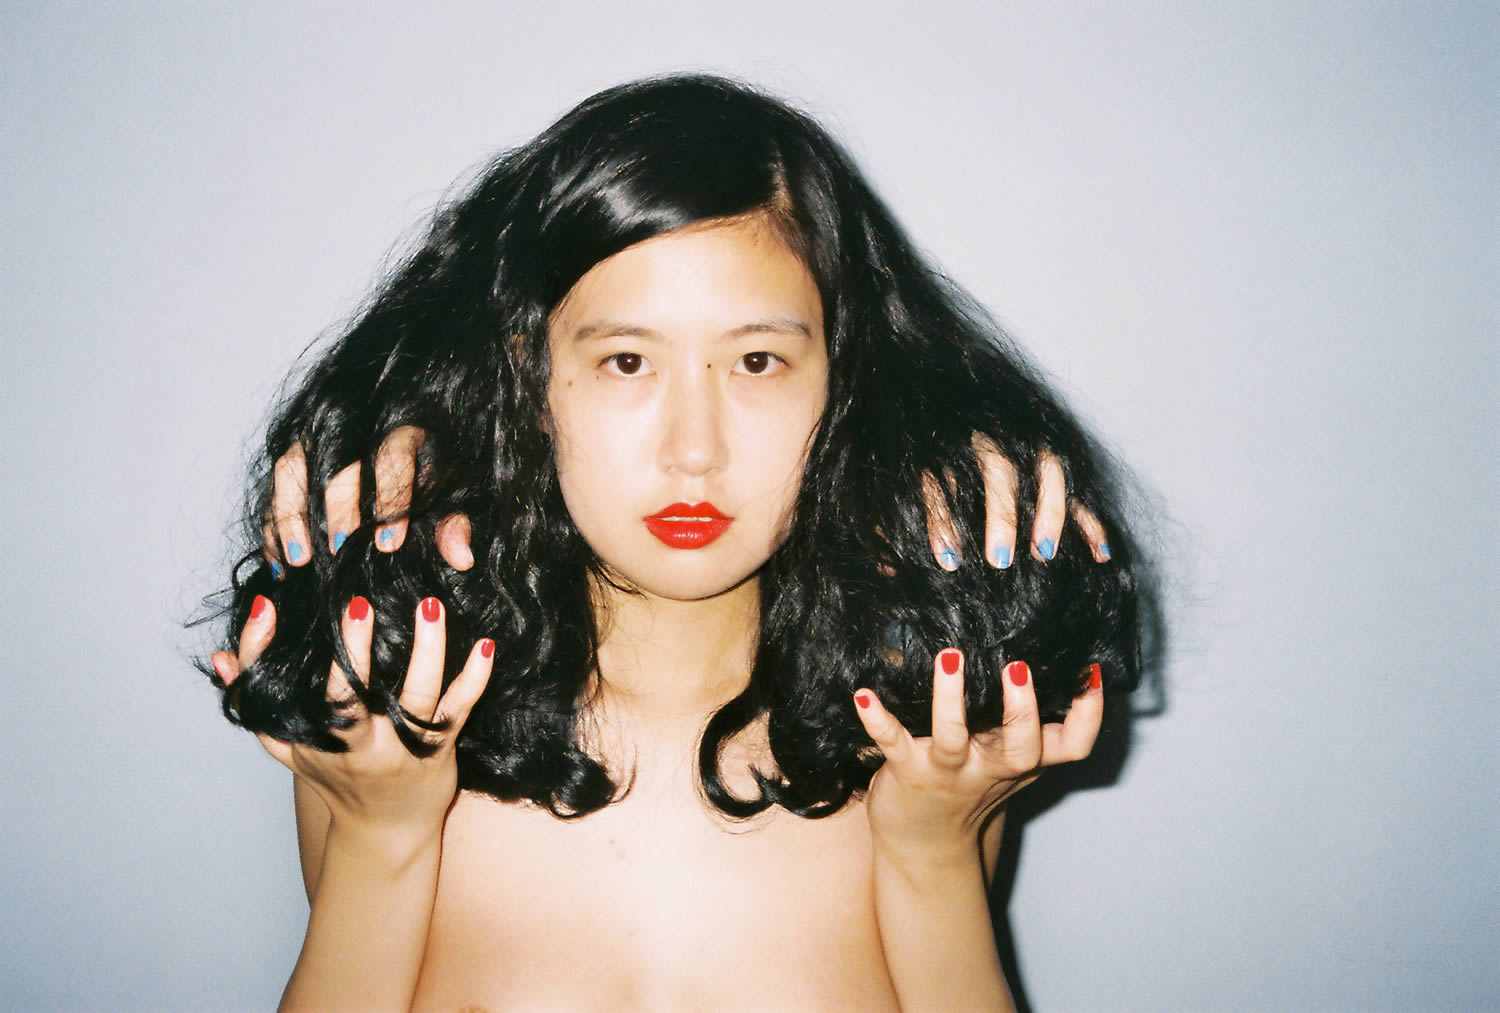 four hands in black hair, photography